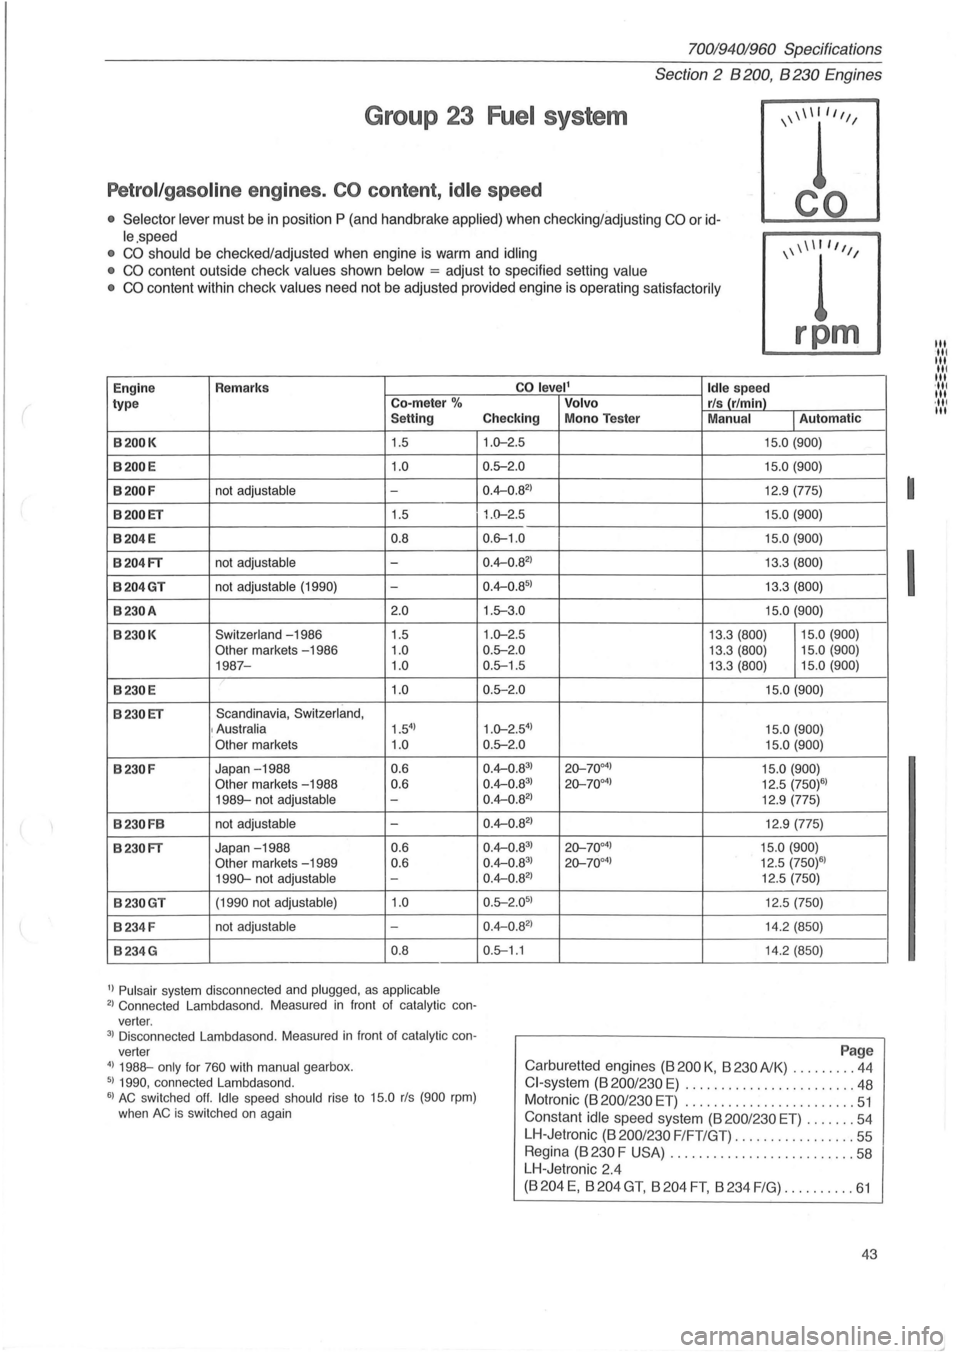 VOLVO 960 1982  Service Service Manual ( 
70019401960 SpecHications 
Section 
2  B 200, B 230 Engines 
Group  23 Fuel system 
Petrol/gasoline engines . CO content, idle speed 
•  Selector  lever must be in position  P (and  handbrake app